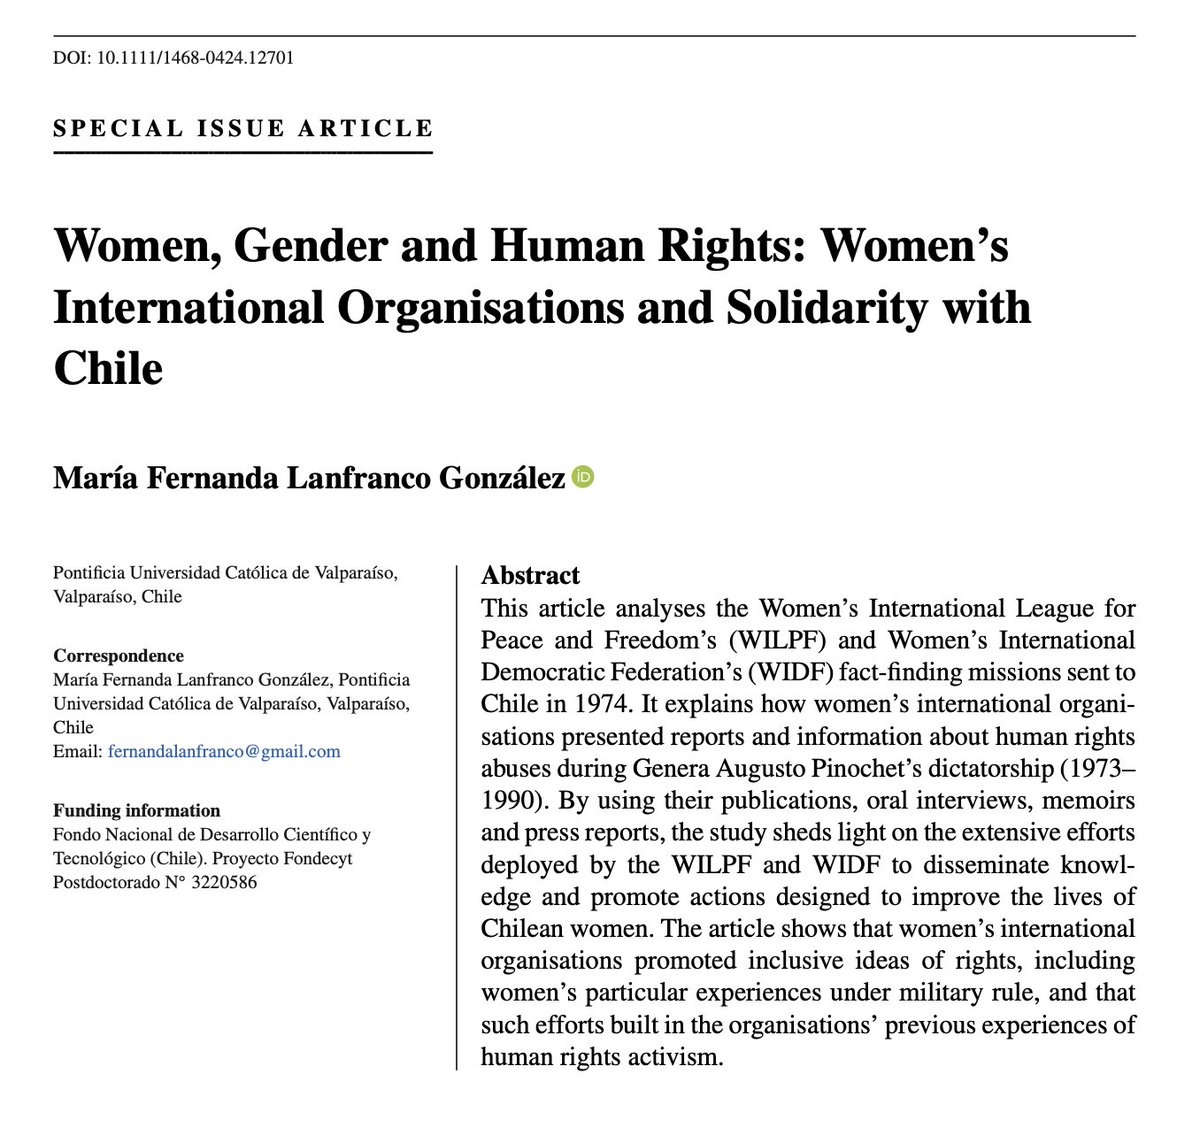 Happy to share my article about women's international  organisations' fact-finding missions to Chile in the 1970s! Look out for the full special issue on women's rights and human rights in @GenderHistory